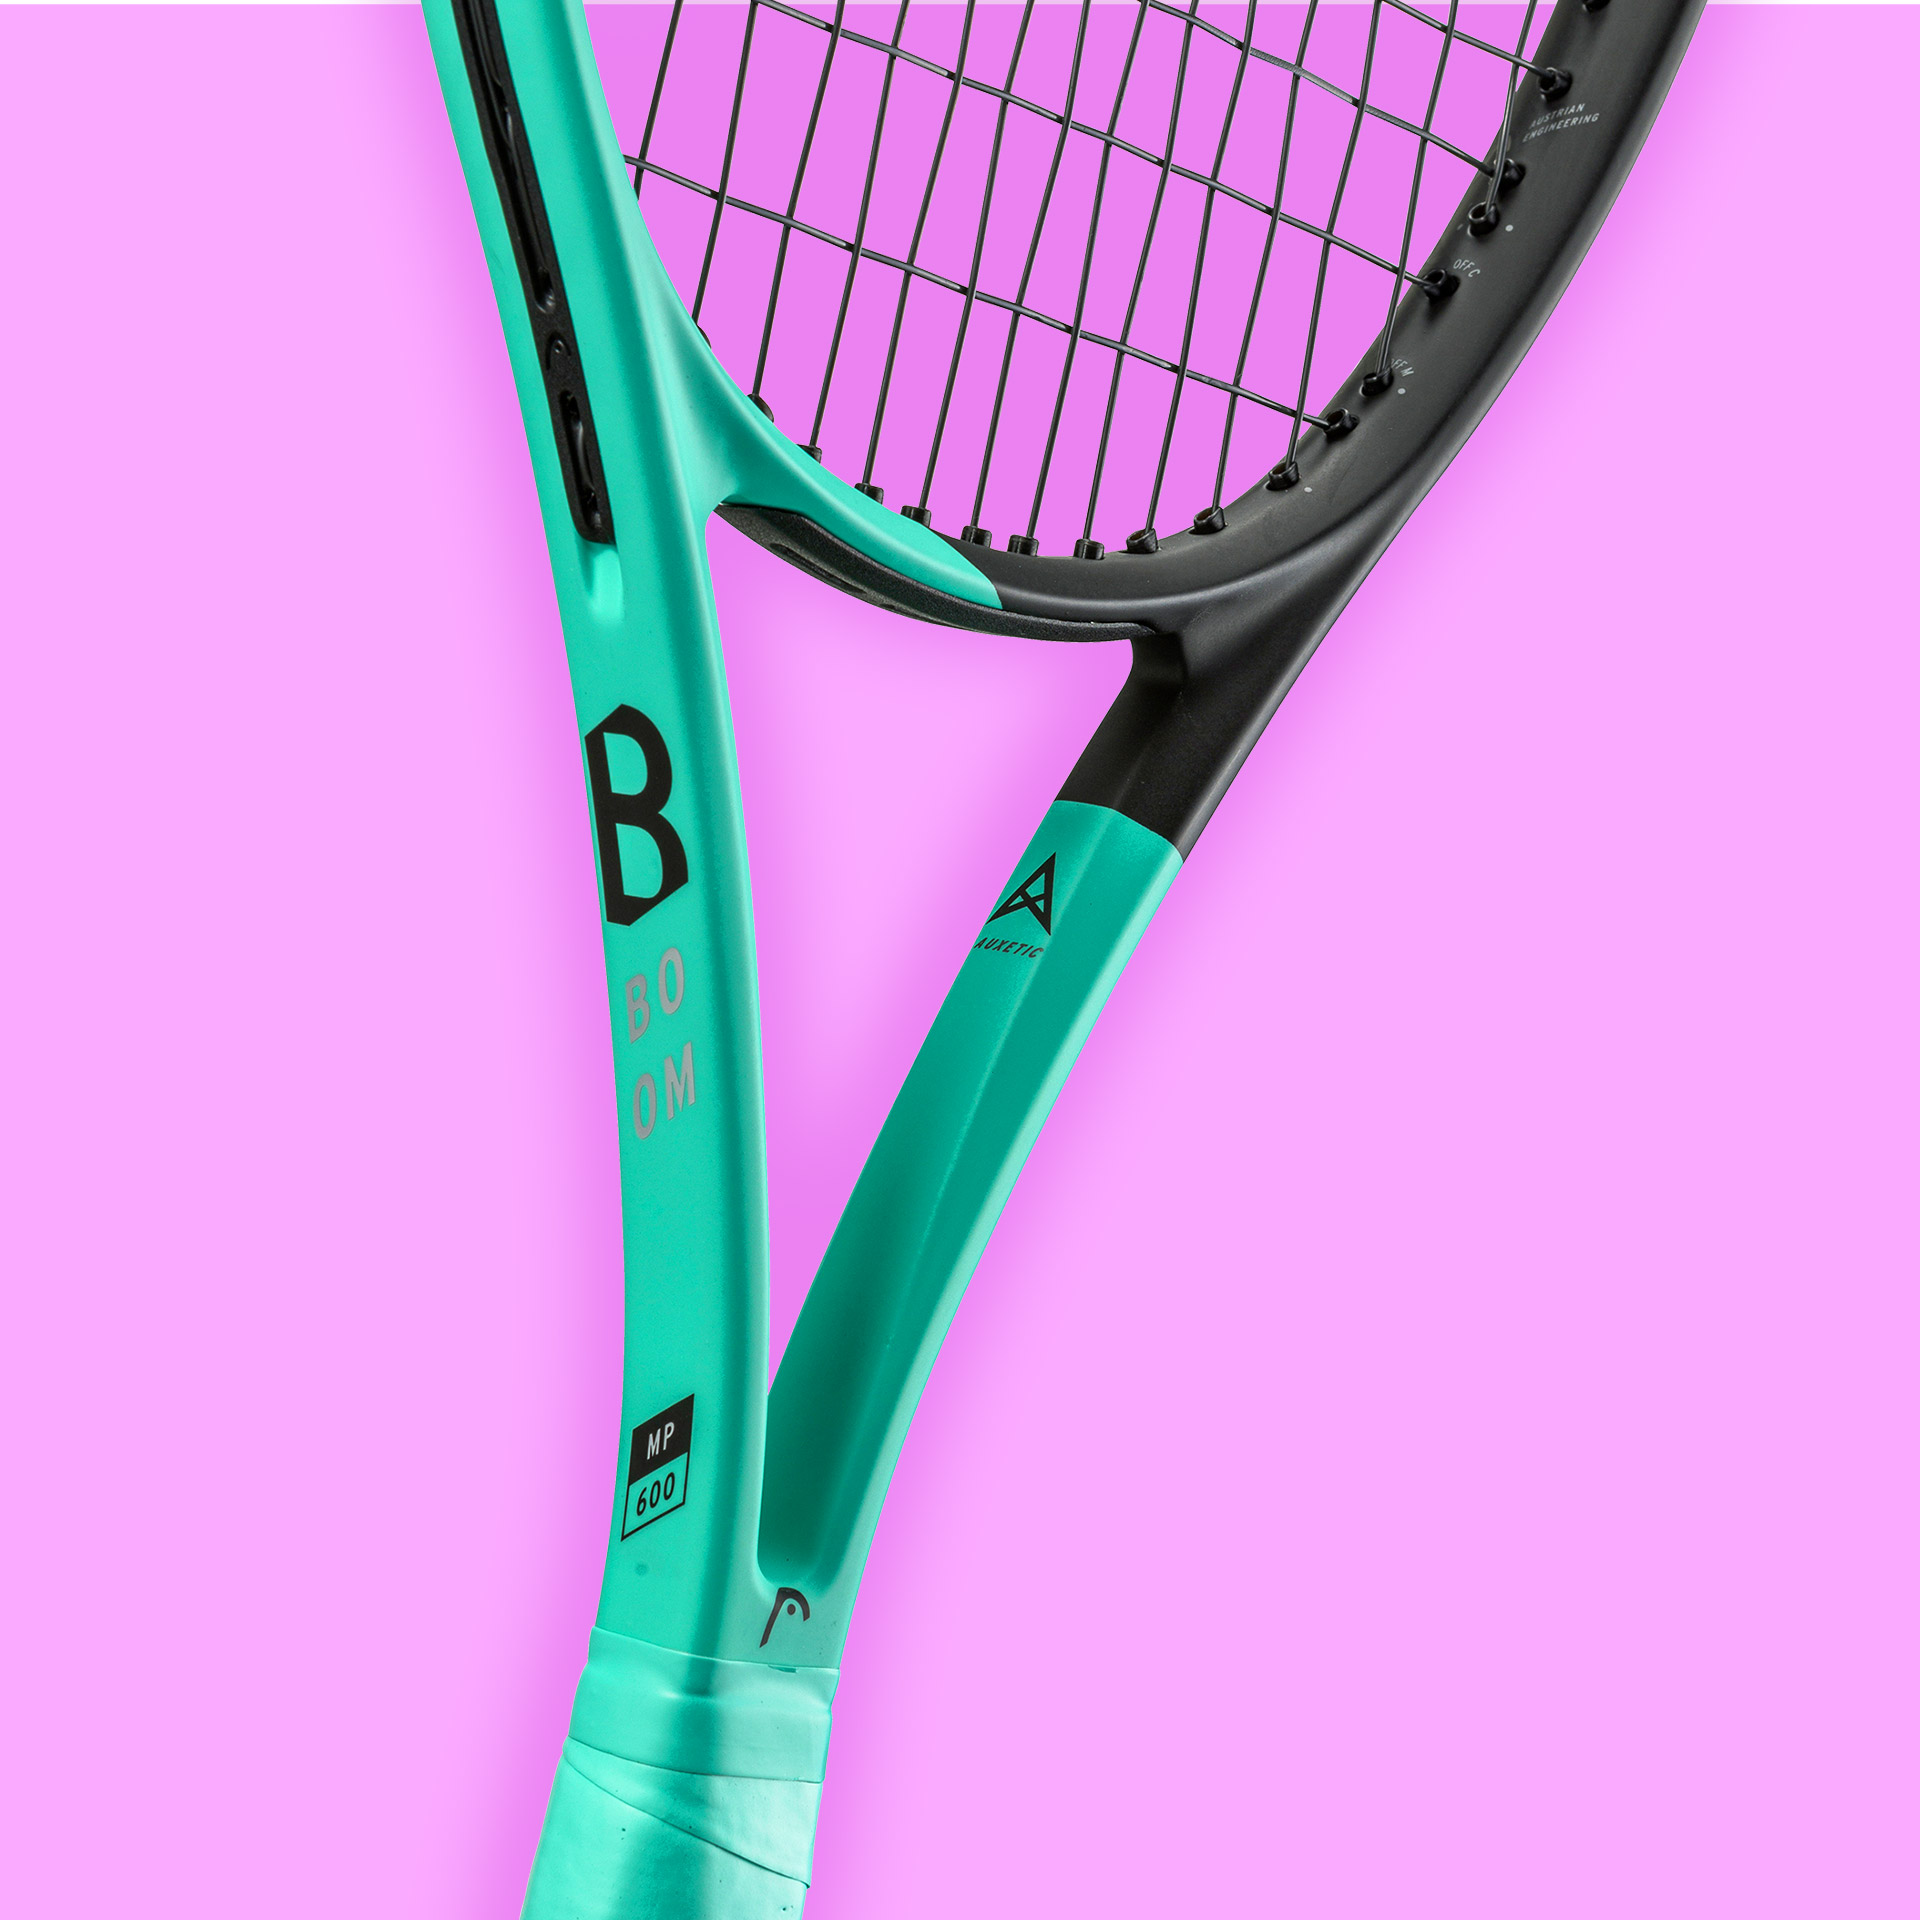 The new HEAD BOOM racquet series - now on Tennis-Point!